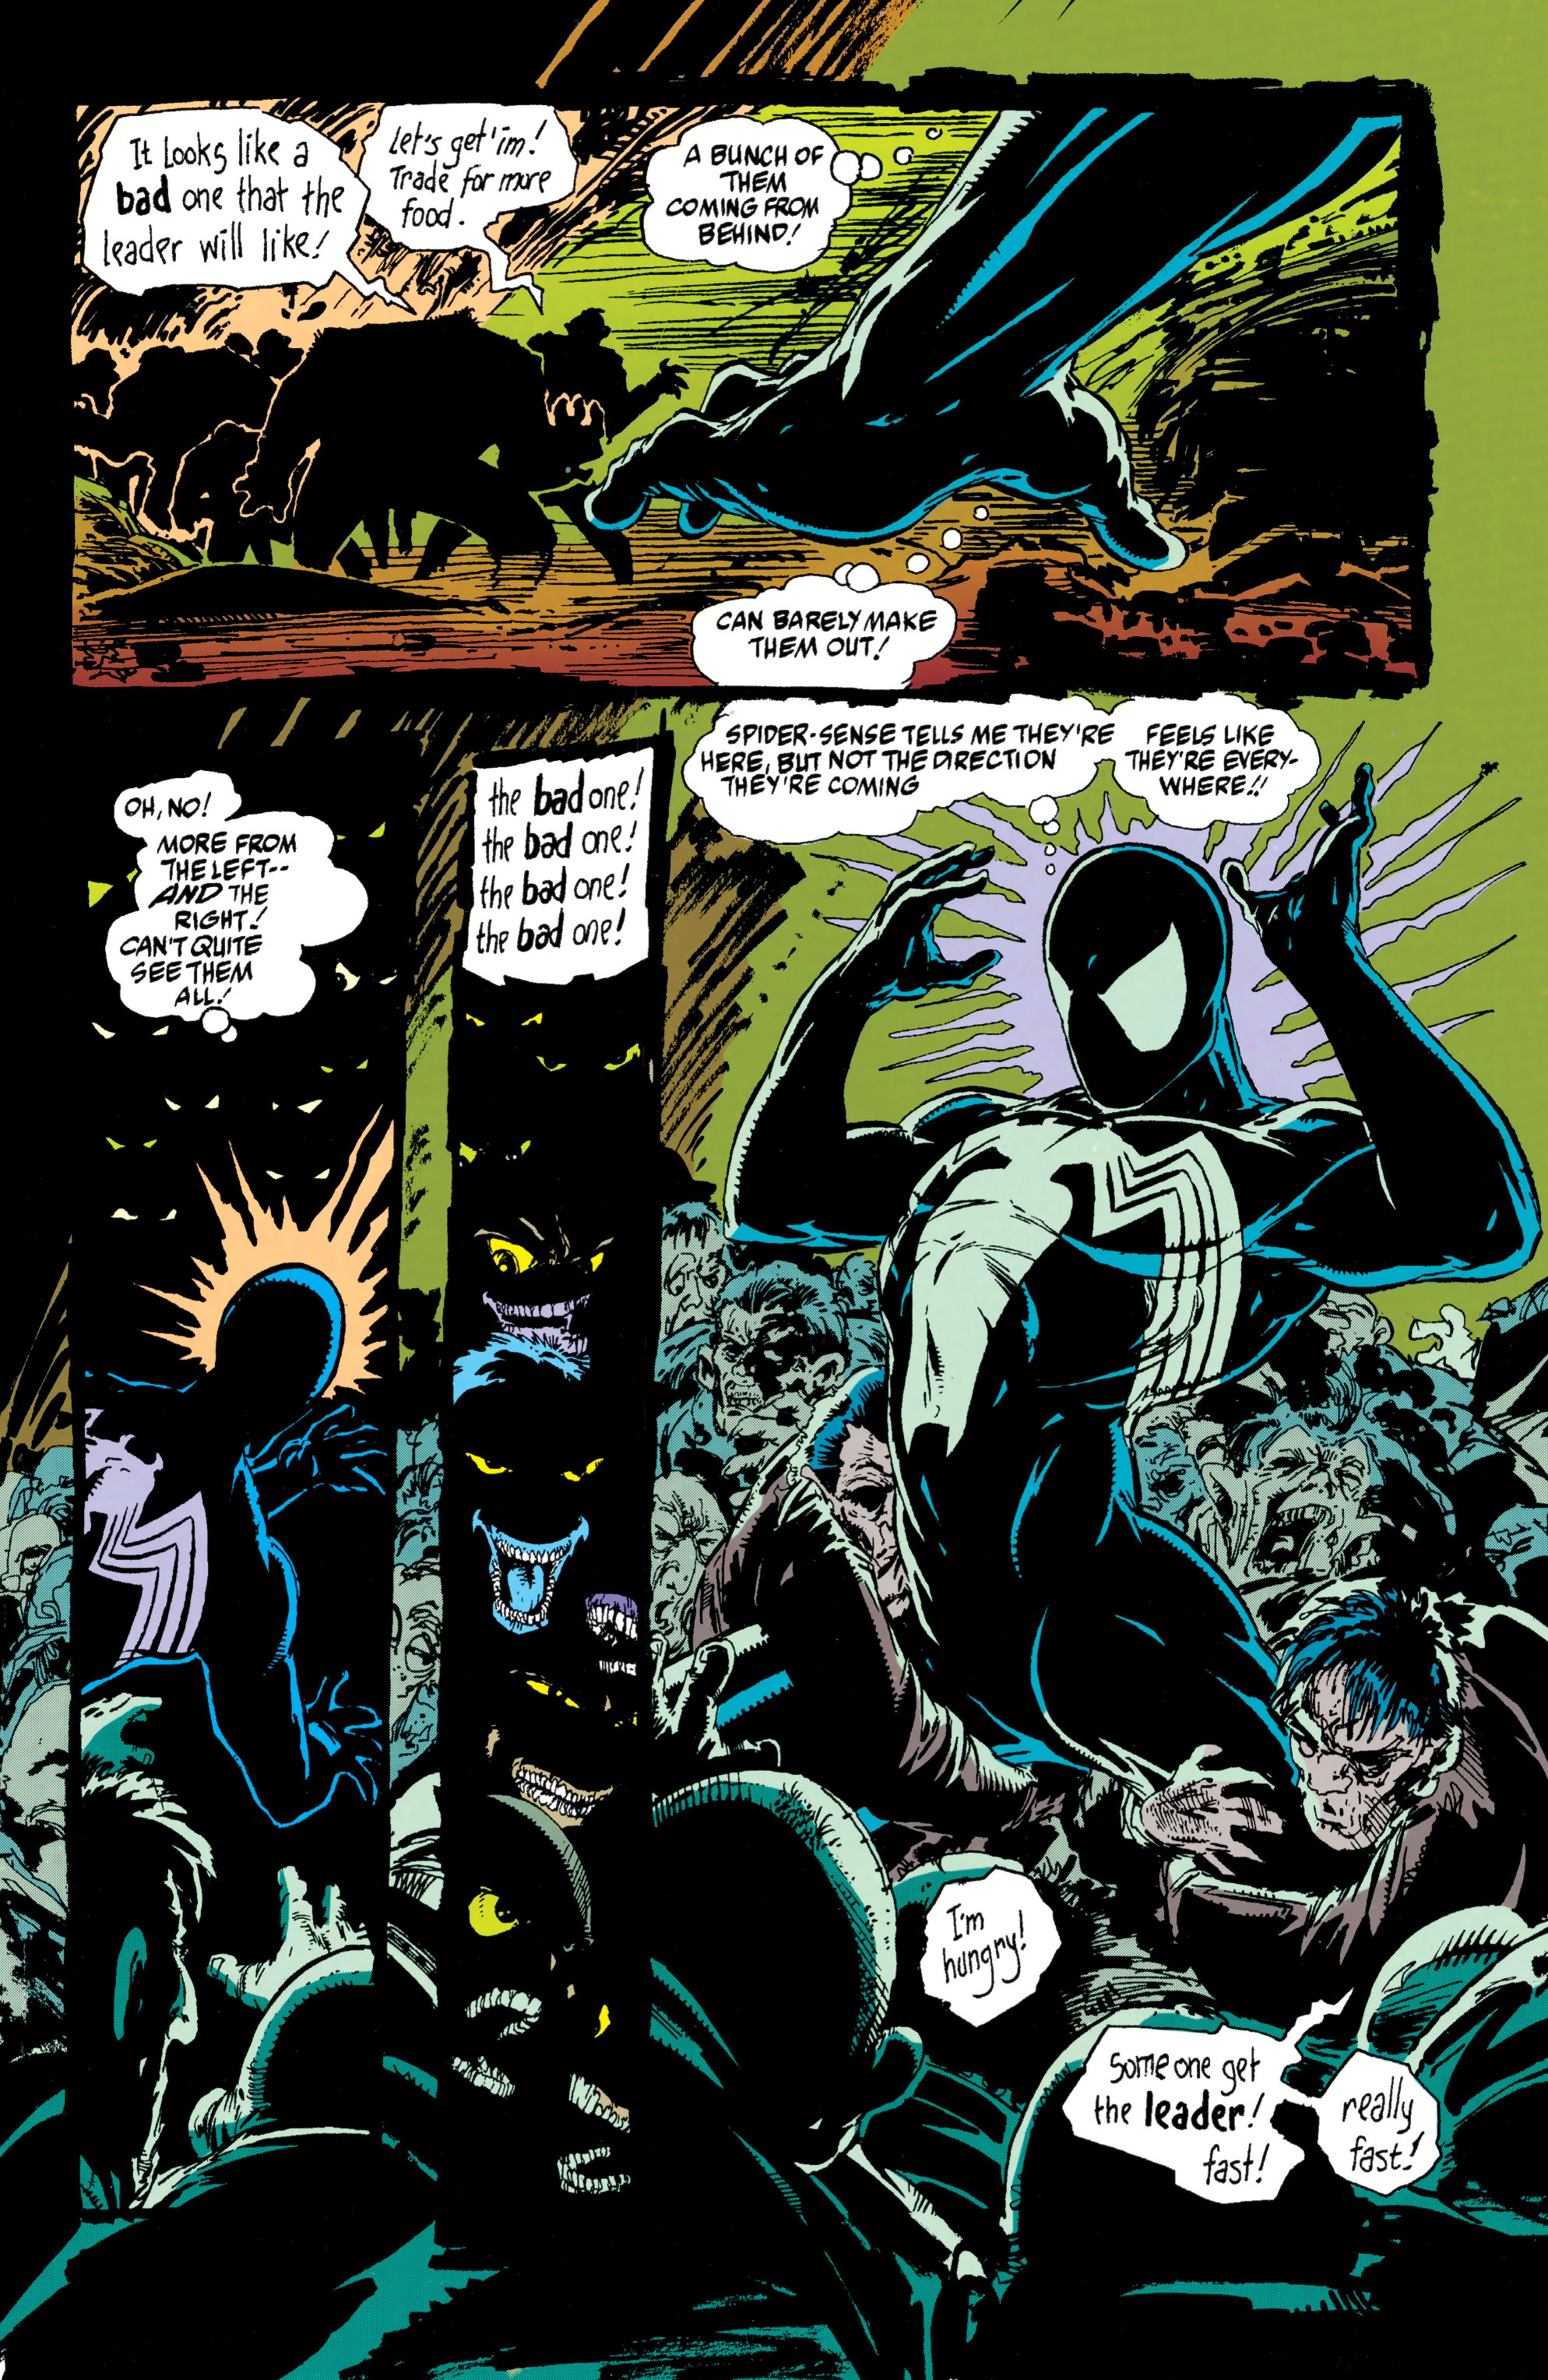 Spider-Man (1990) 13_-_Sub_City_Part_1_of_2 Page 21